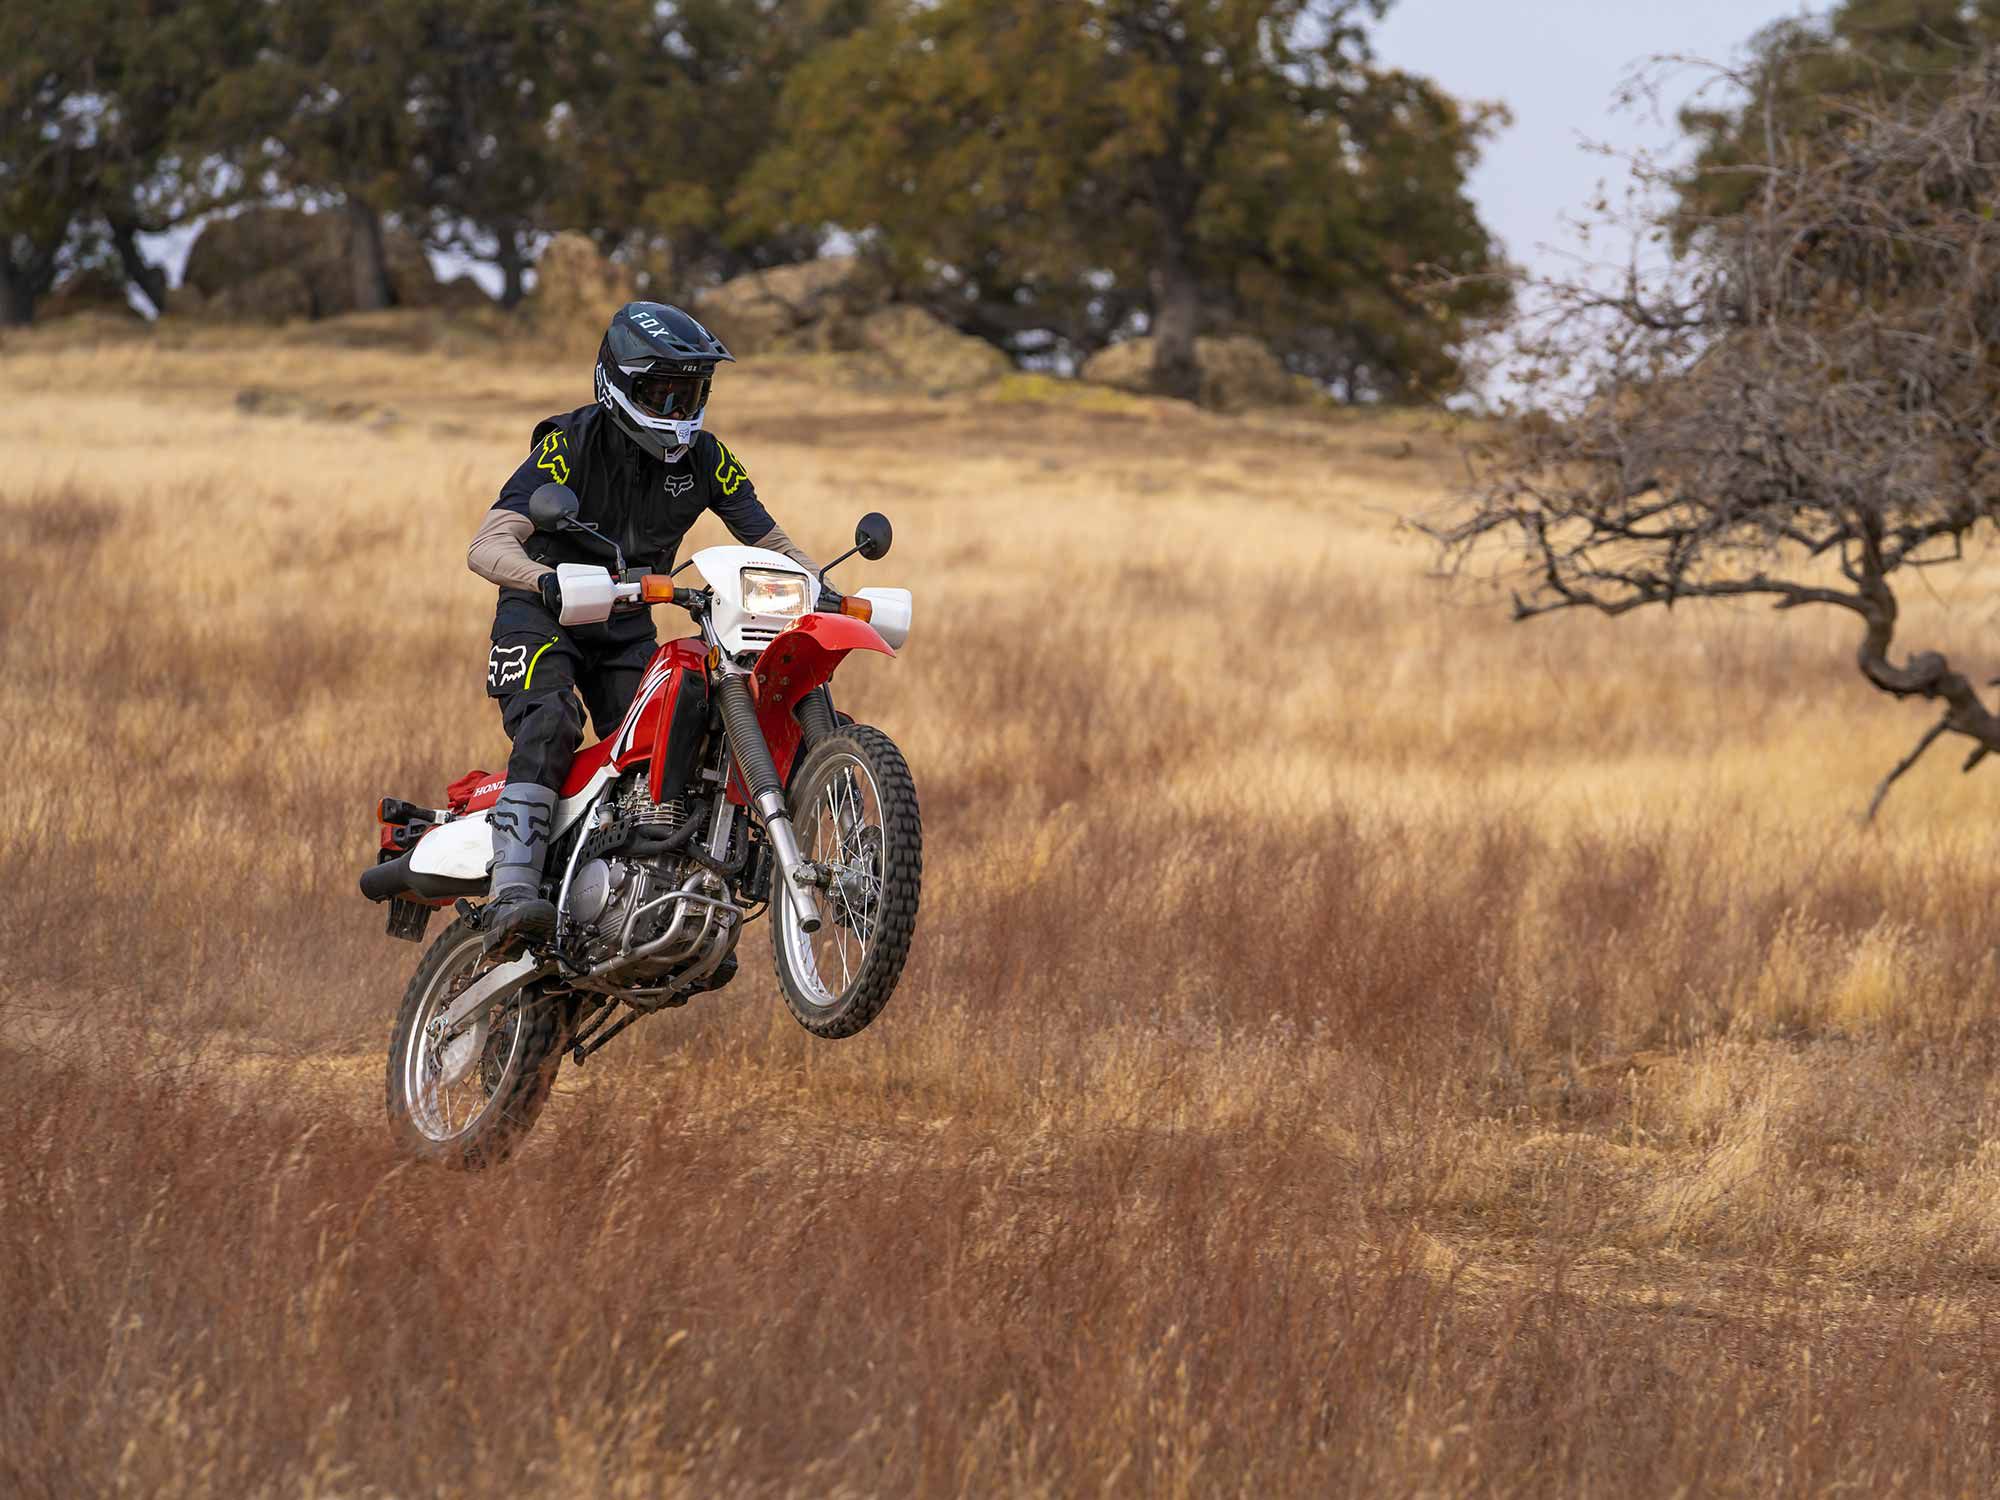 For a simple machine with some oomph, the Honda XR650L stands out.